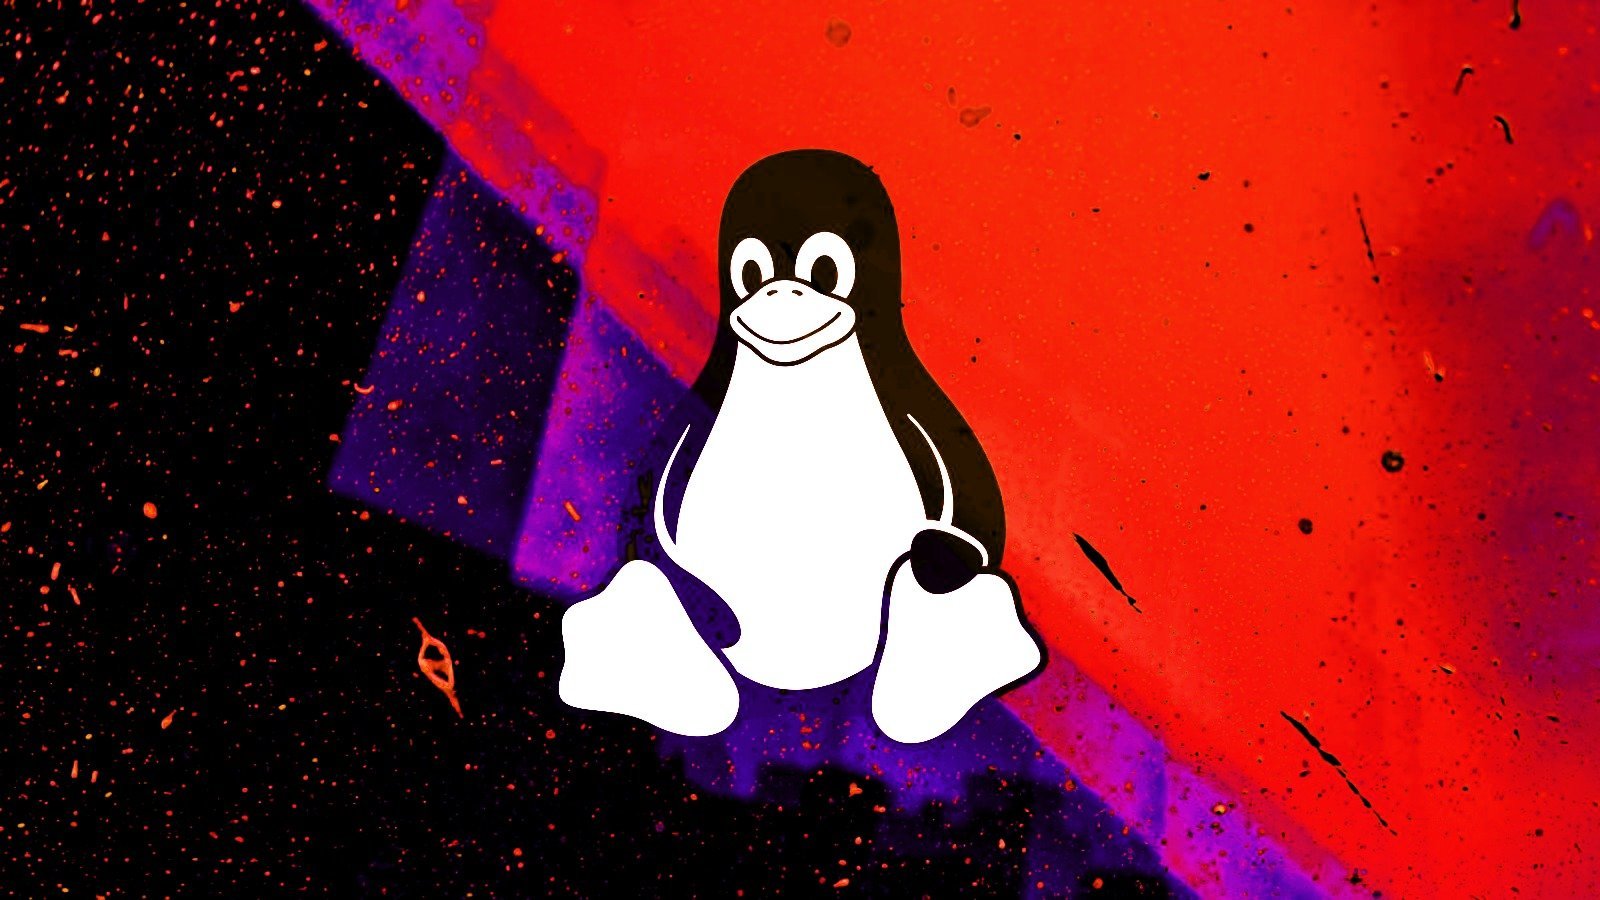 New ‘Looney Tunables’ Linux bug gives root on major distros – Source: www.bleepingcomputer.com